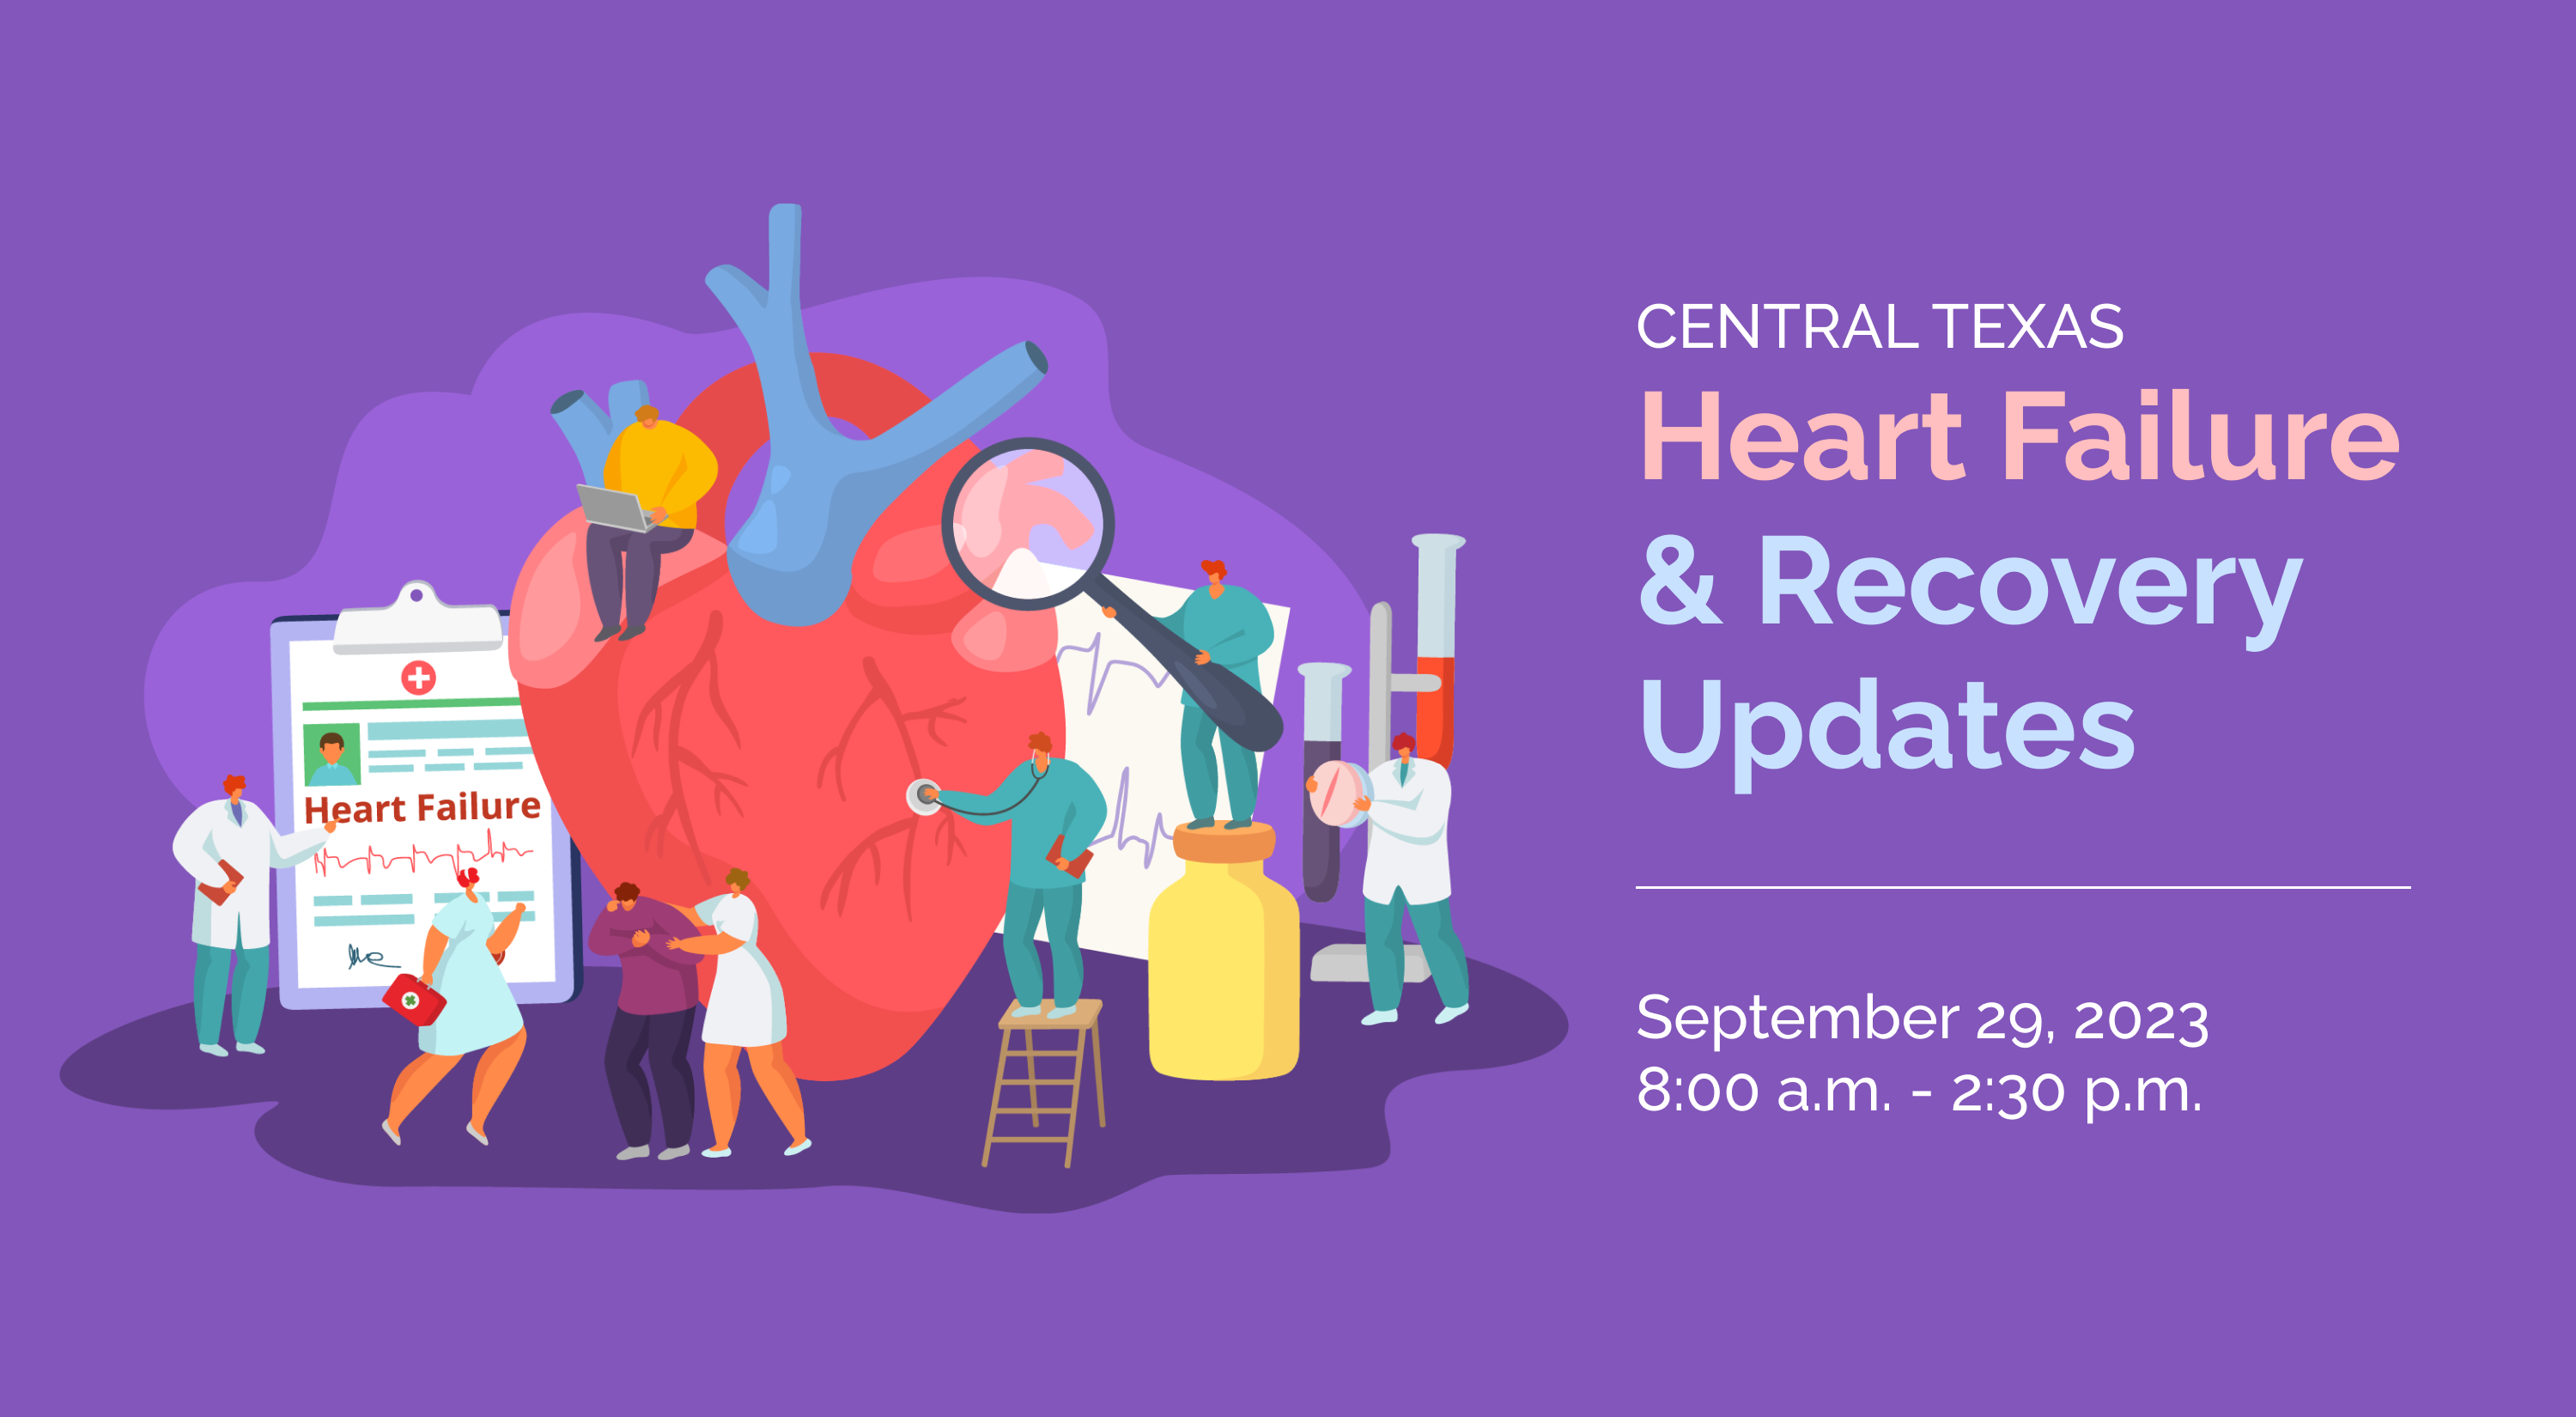 Central Texas Heart Failure & Recovery Updates